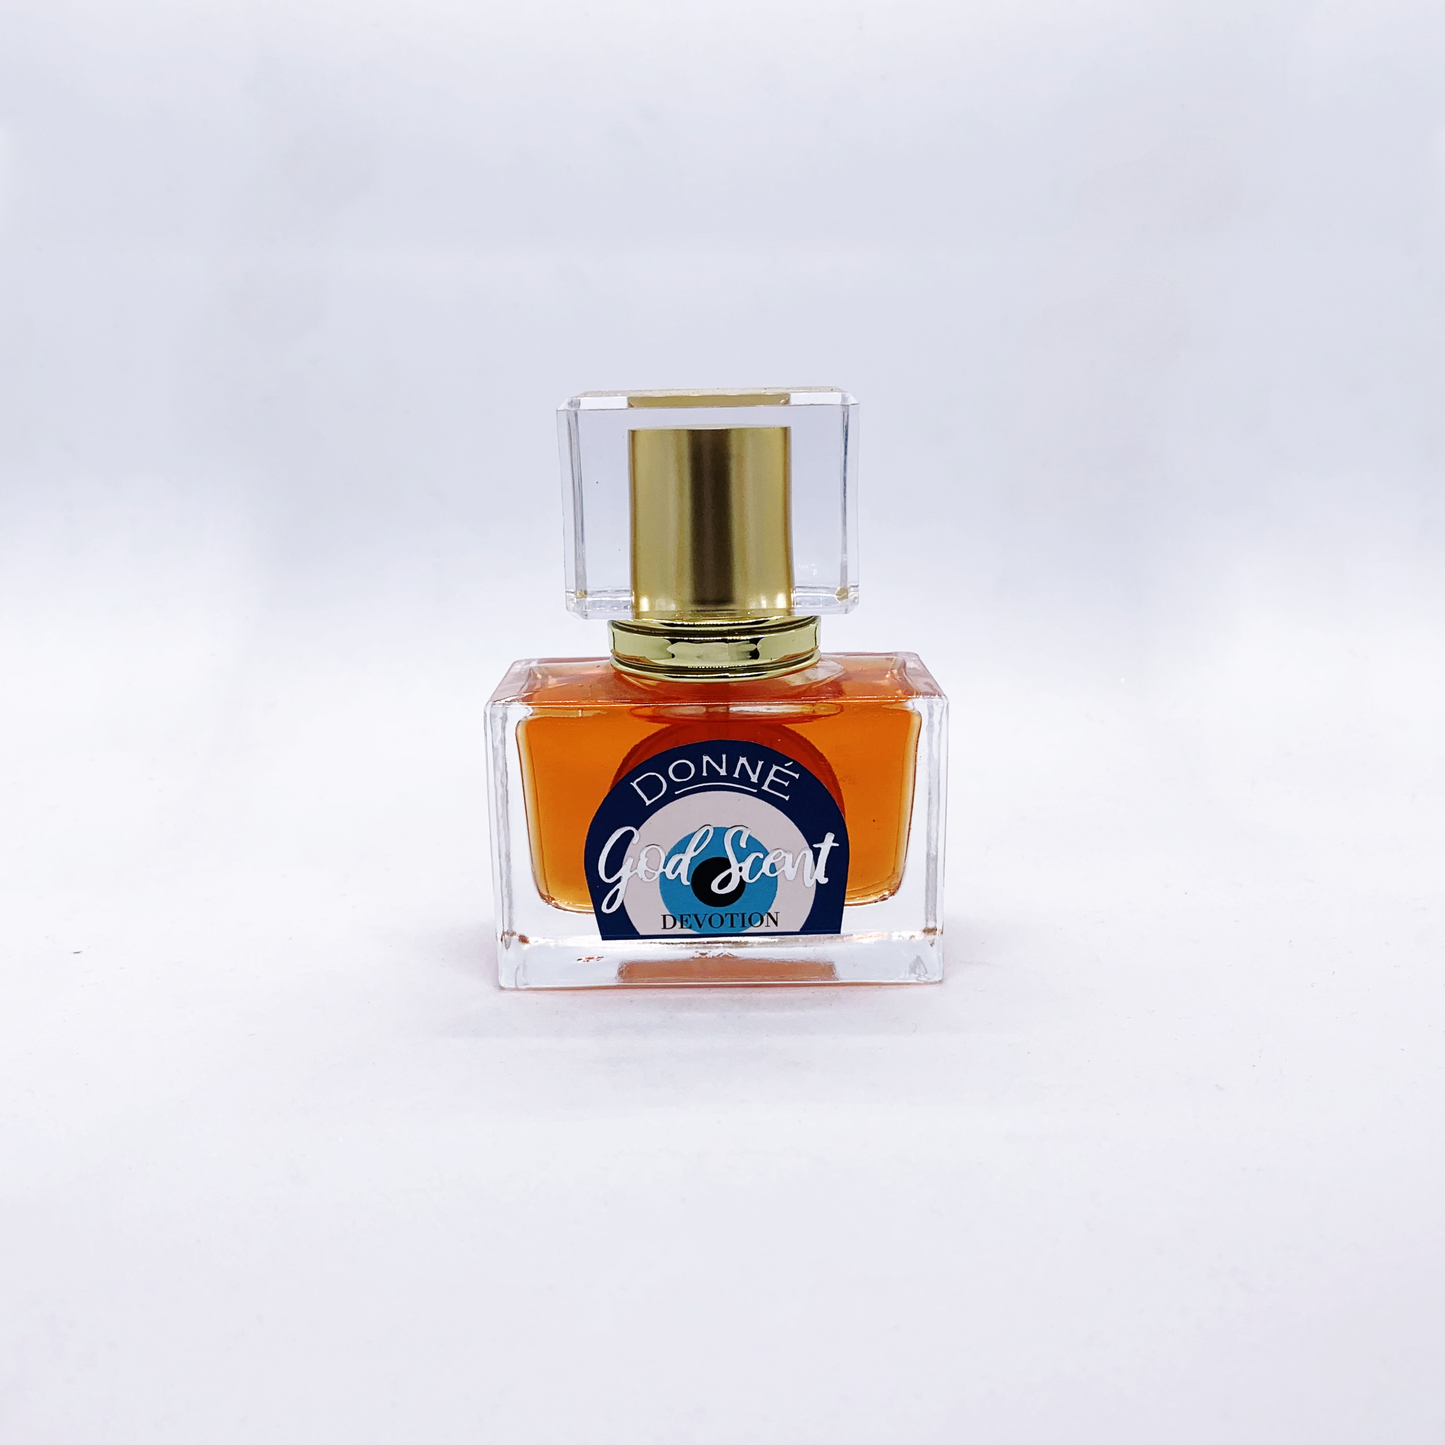 30 ml White Floral longlasting perfume in pink red with an evil eye label and silver metallic accents